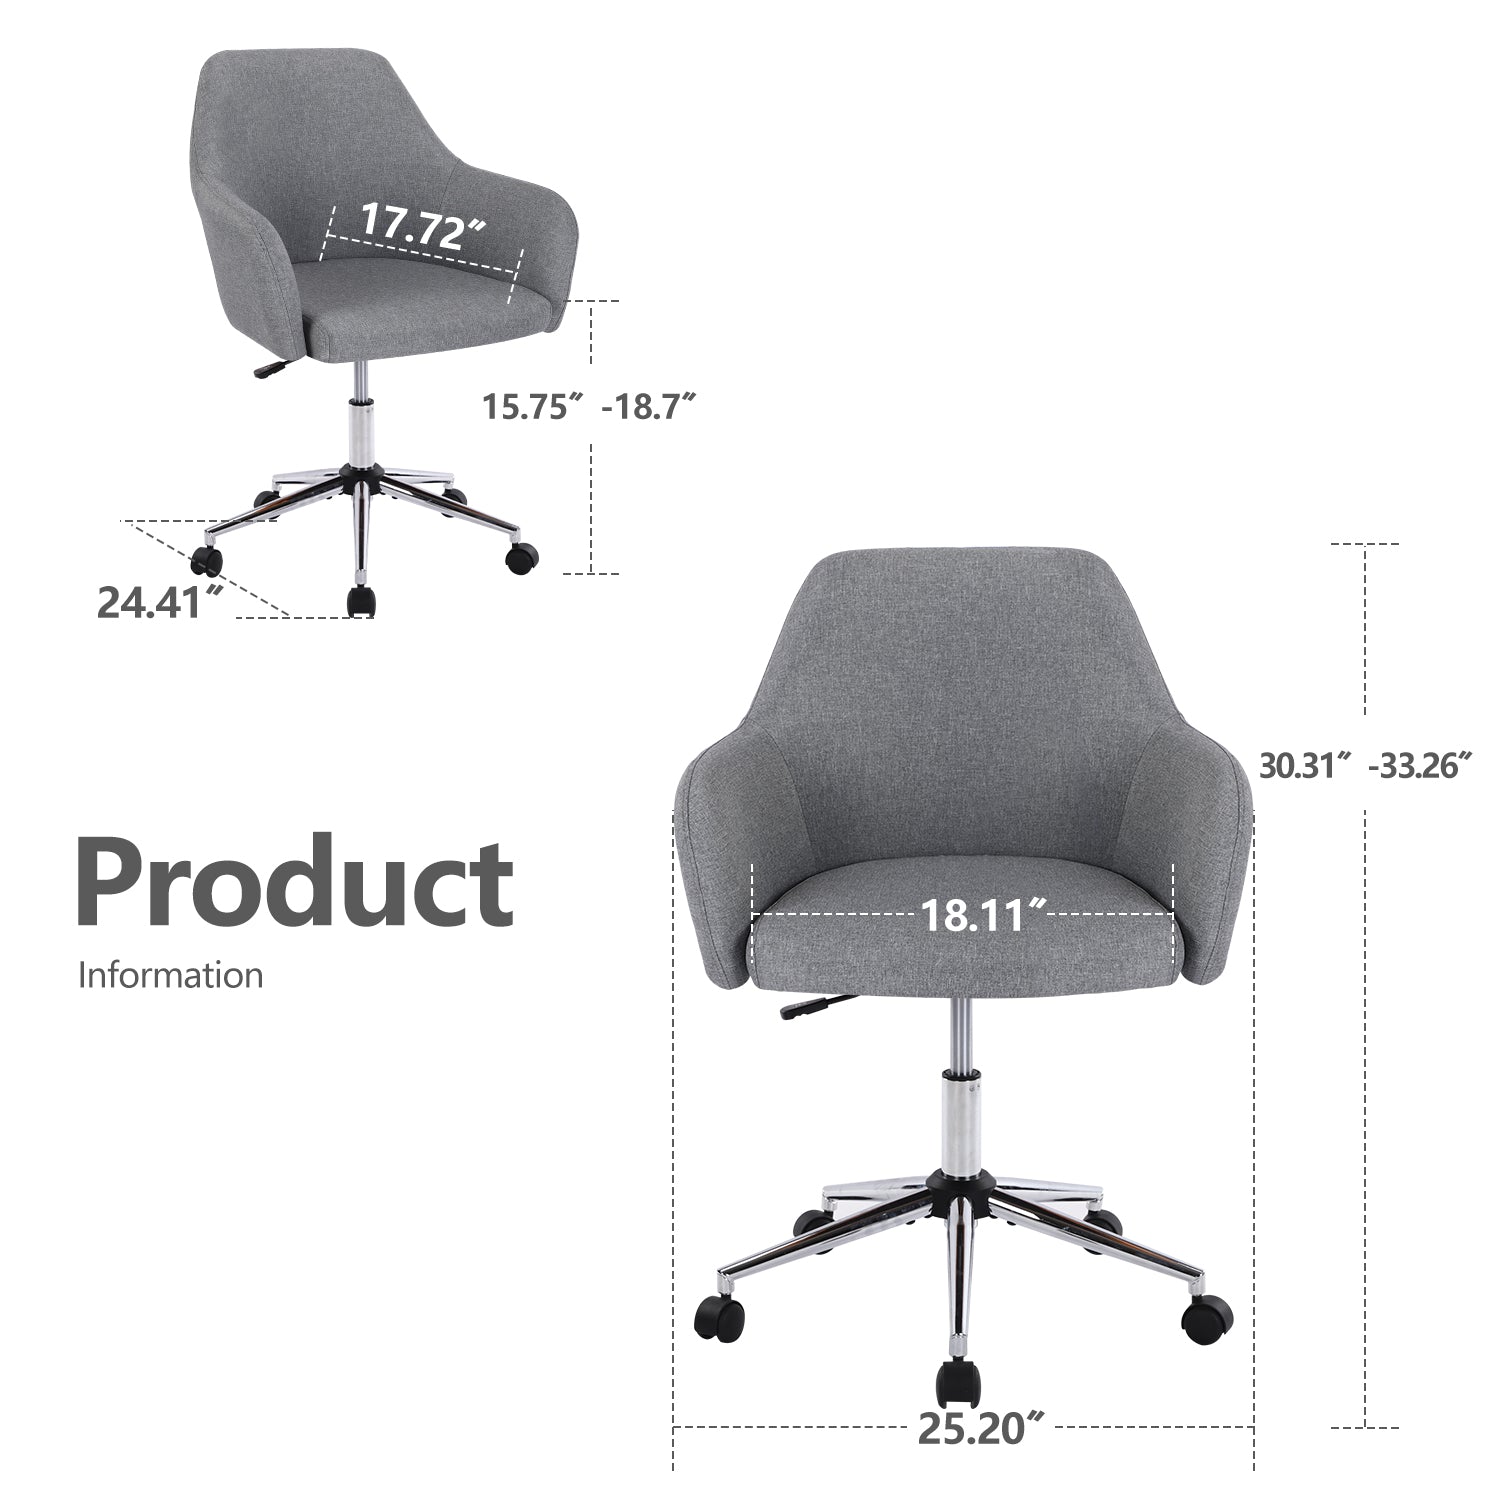 ZNTS Vanbow.Home Office Chair , Swivel Adjustable Task Chair Executive Accent Chair with Soft Seat W152164691